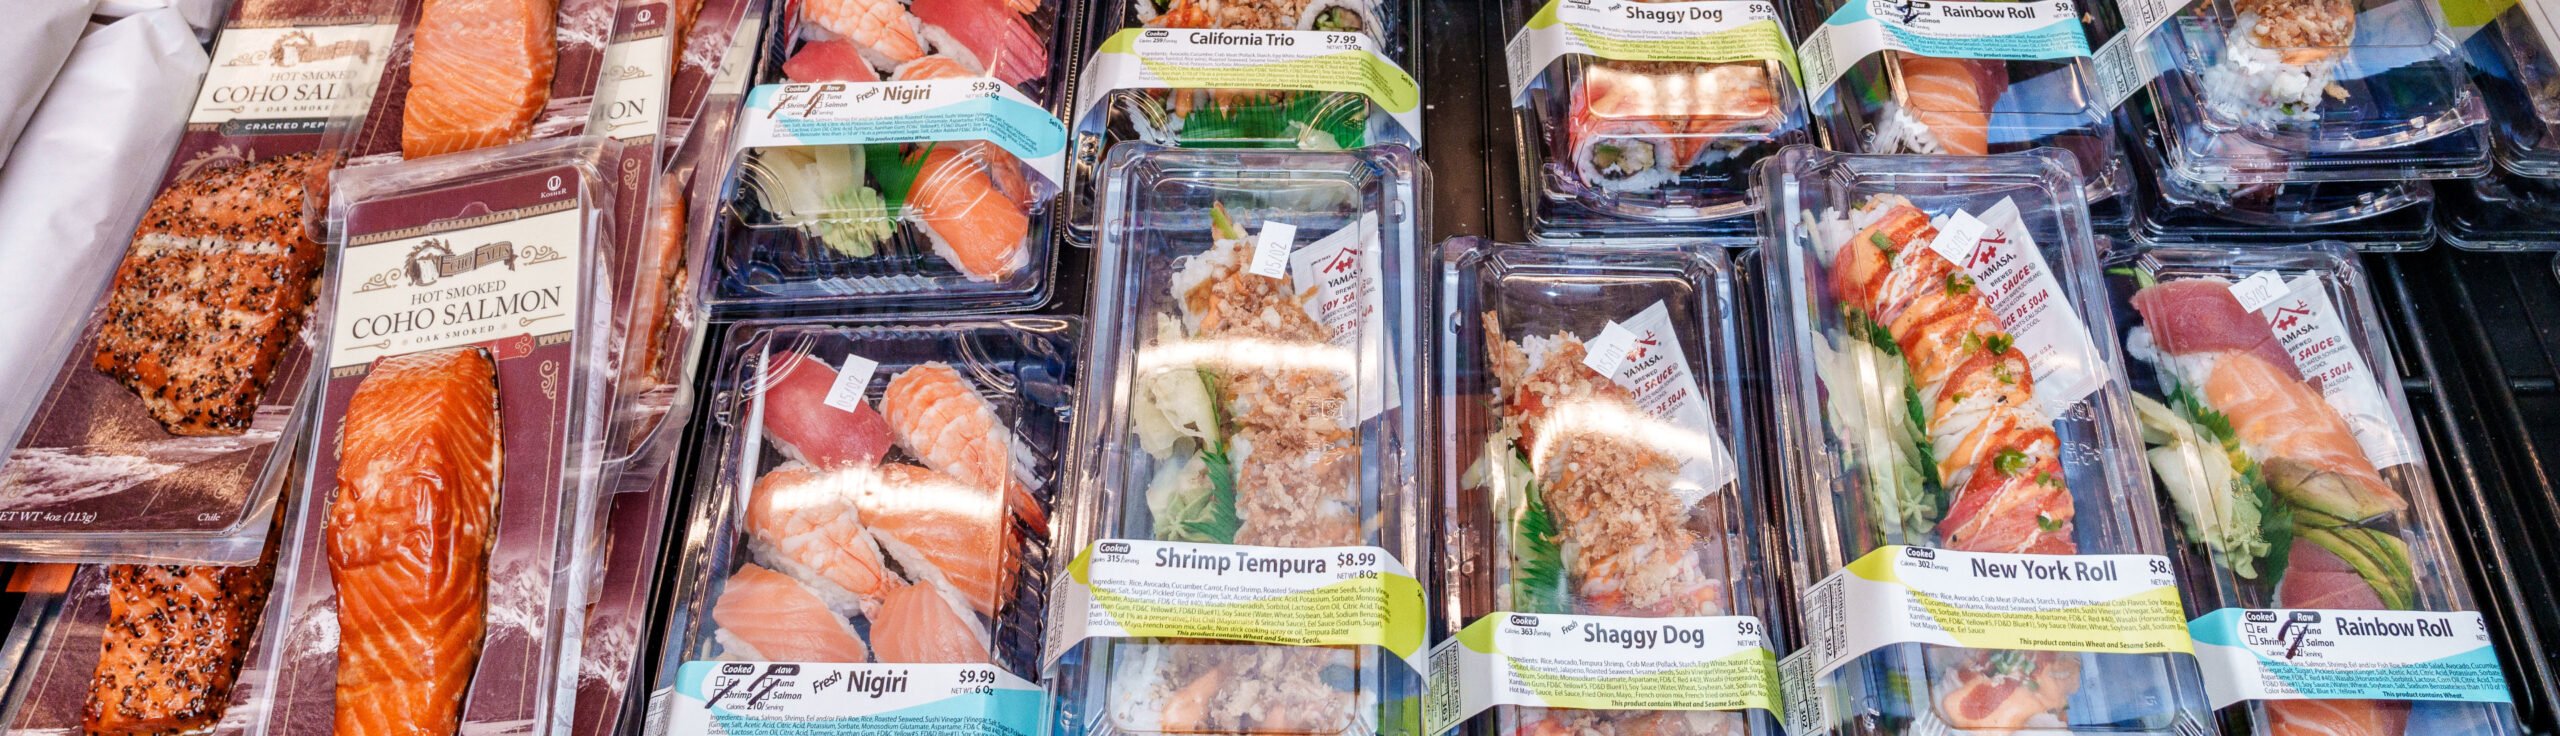 Piggly Wiggly Sushi Options